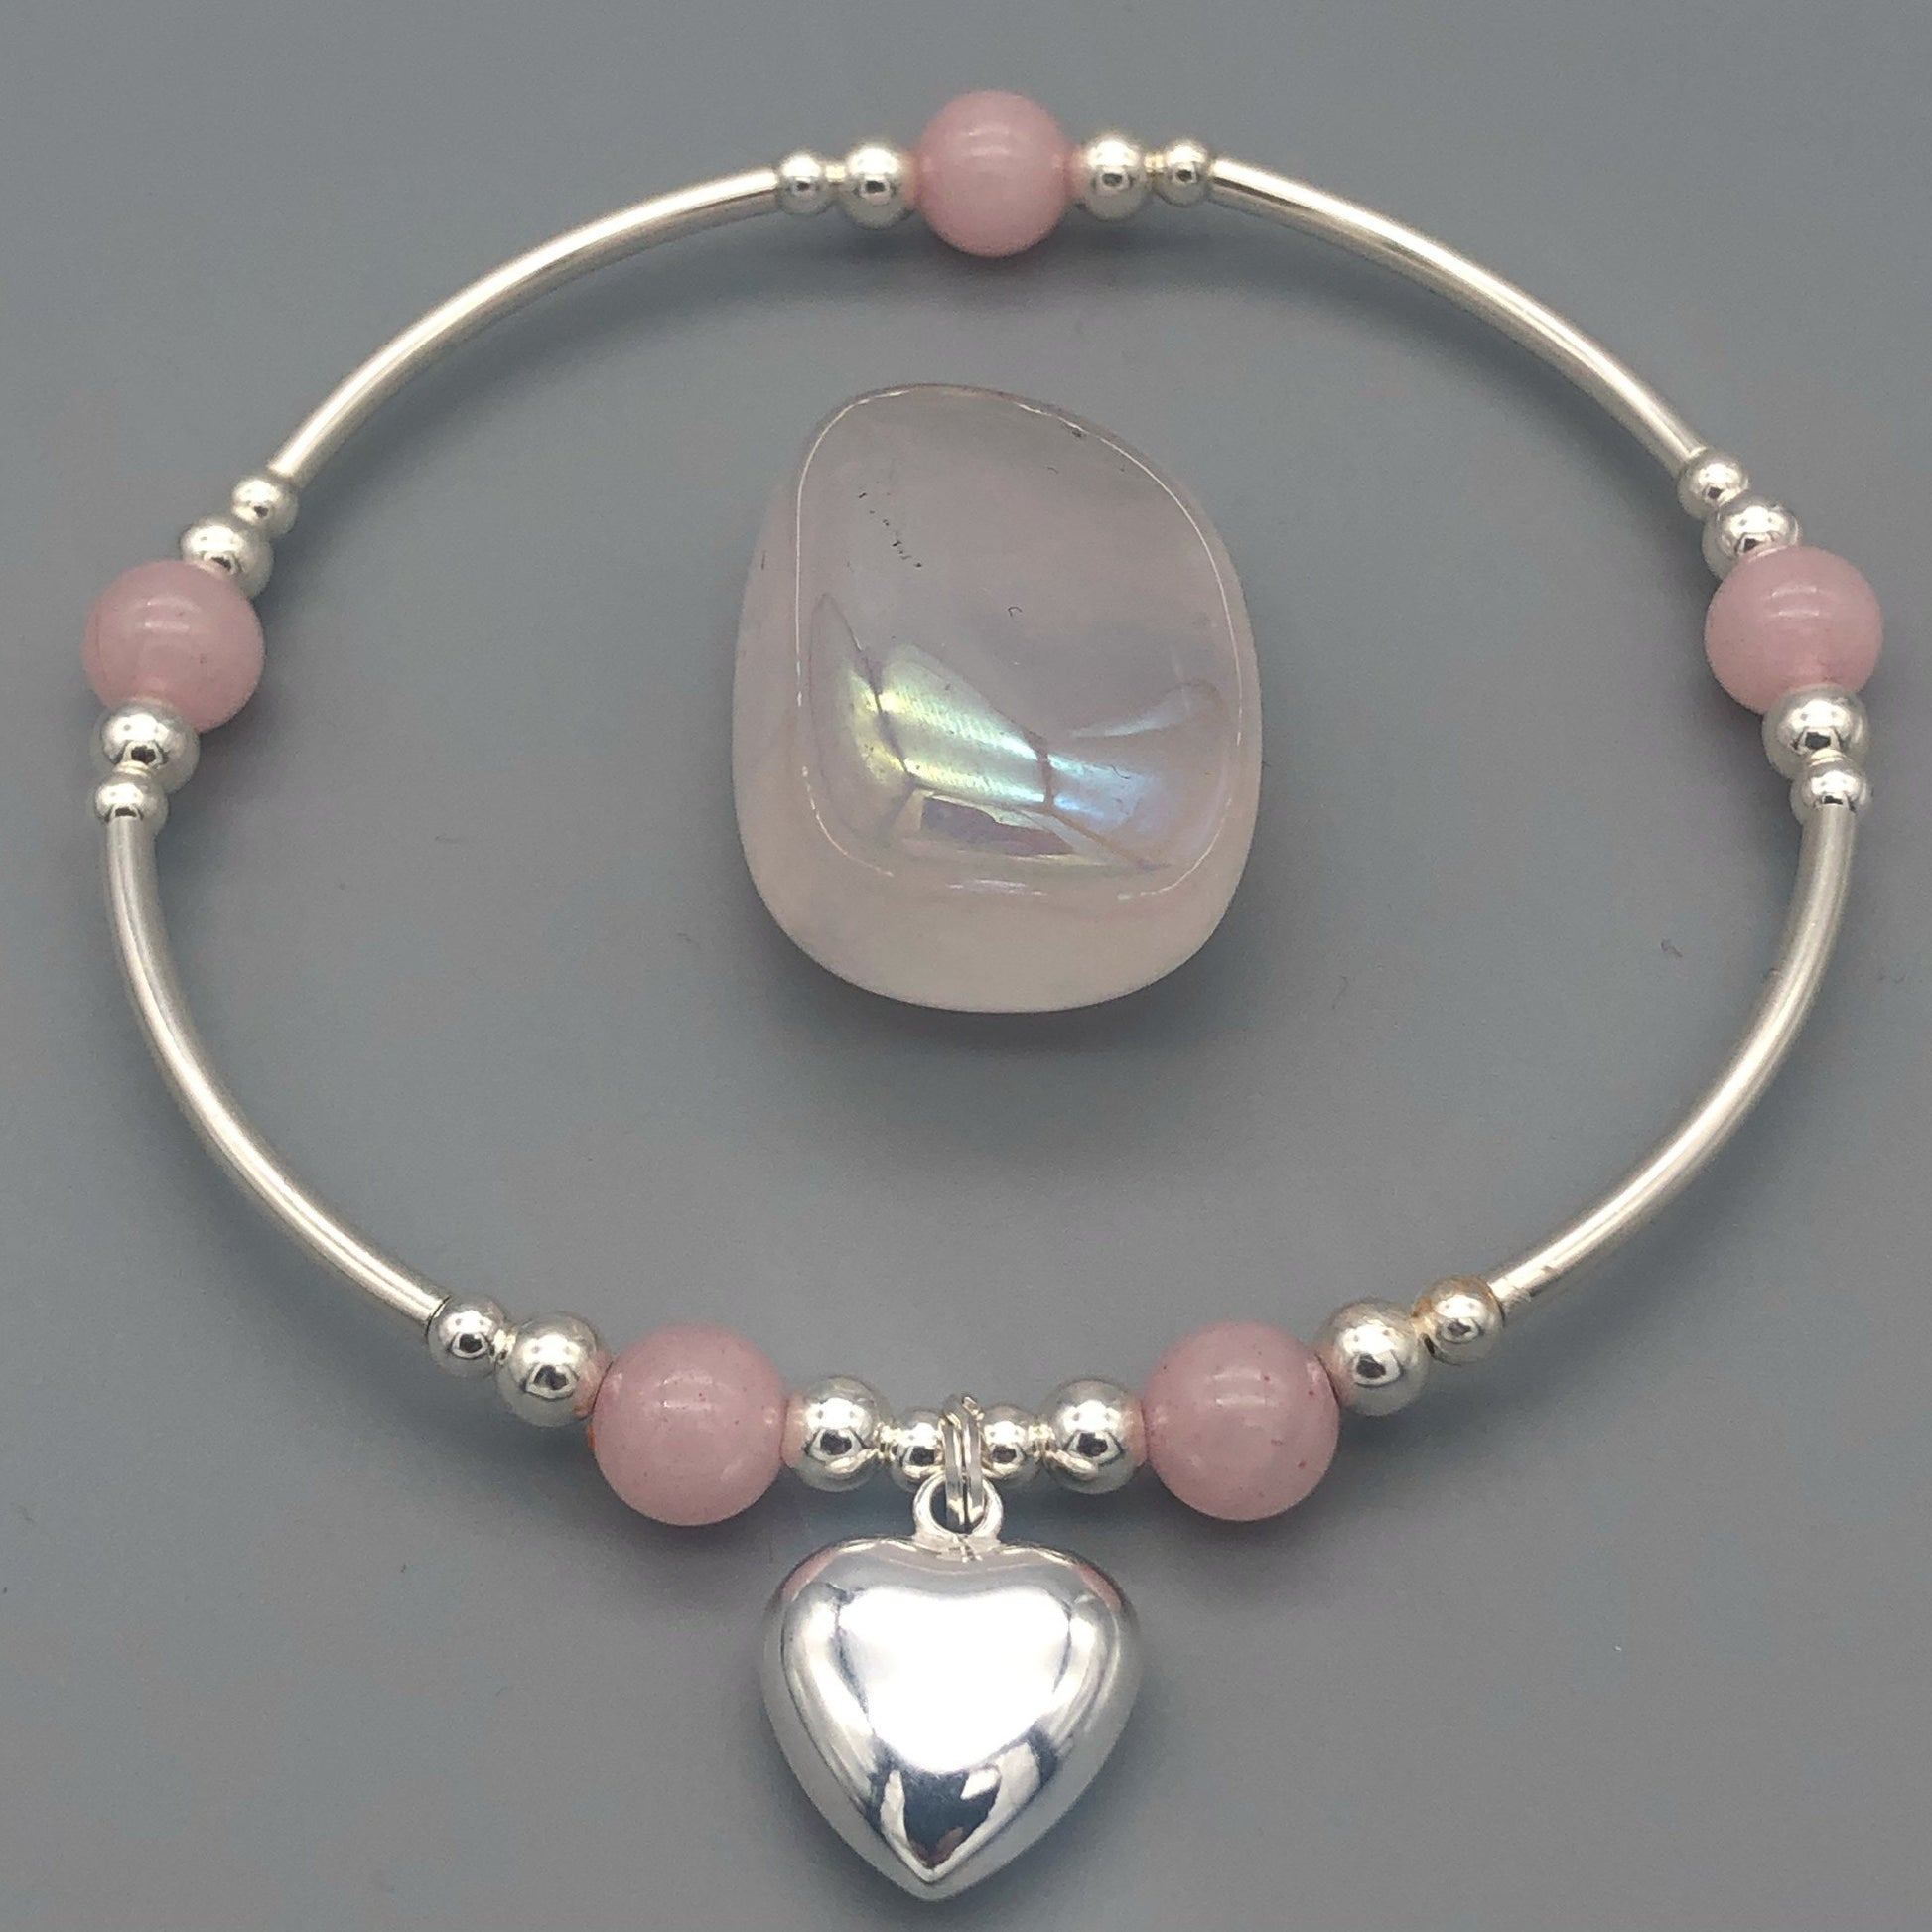 Rose quartz solid heart charm sterling silver hand-made women's stacking bracelet by My Silver Wish